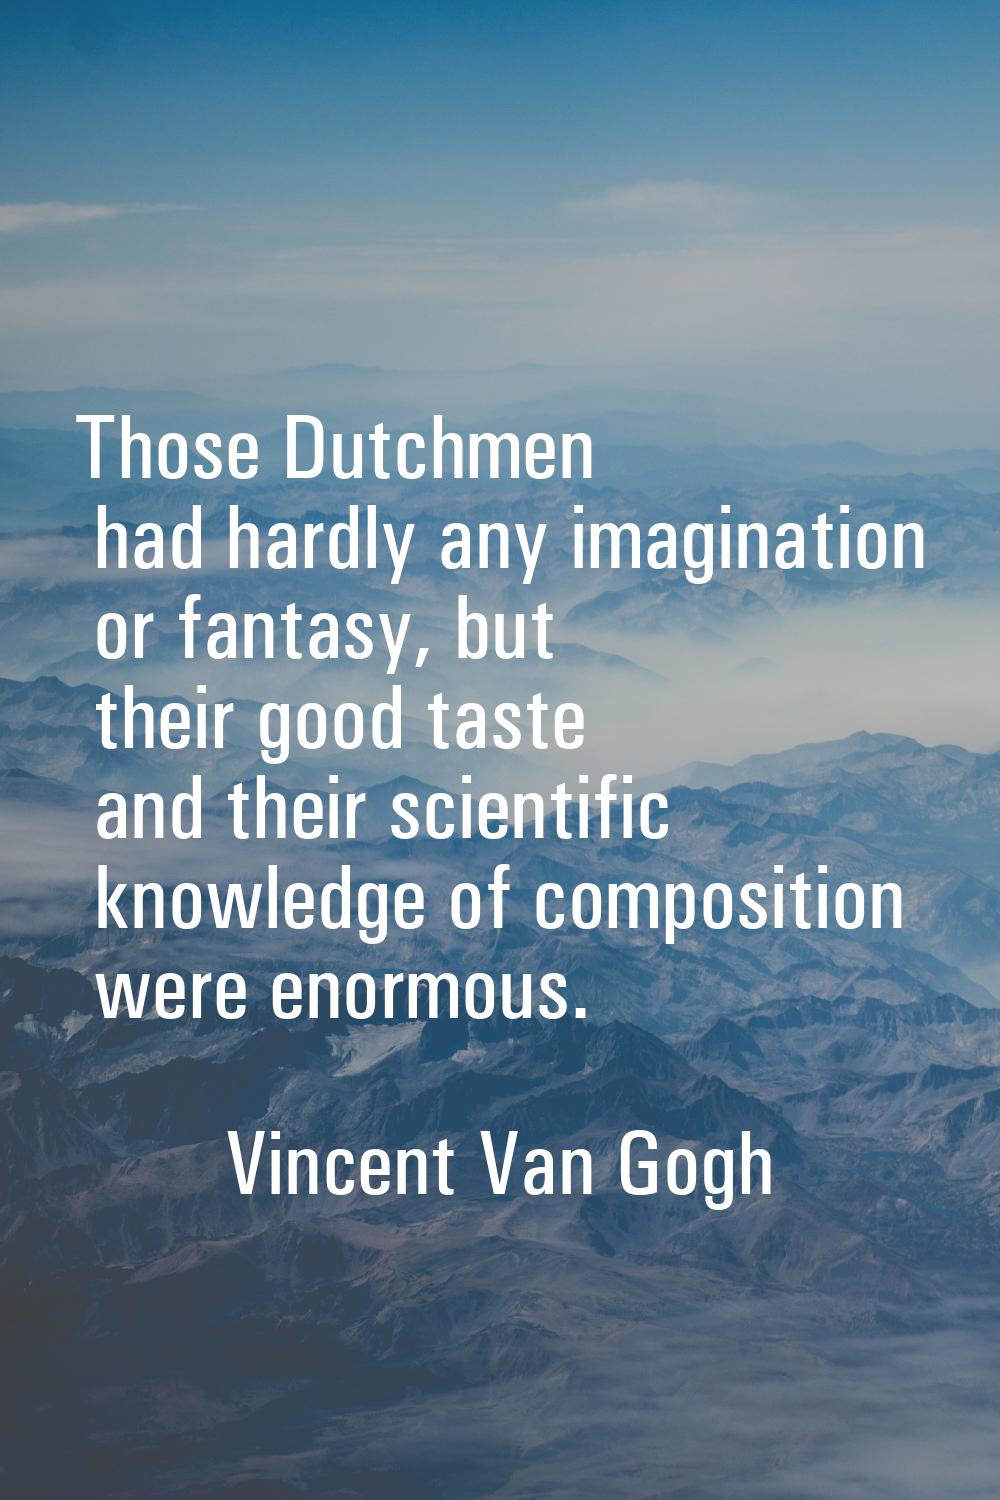 Those Dutchmen had hardly any imagination or fantasy, but their good taste and their scientific kno